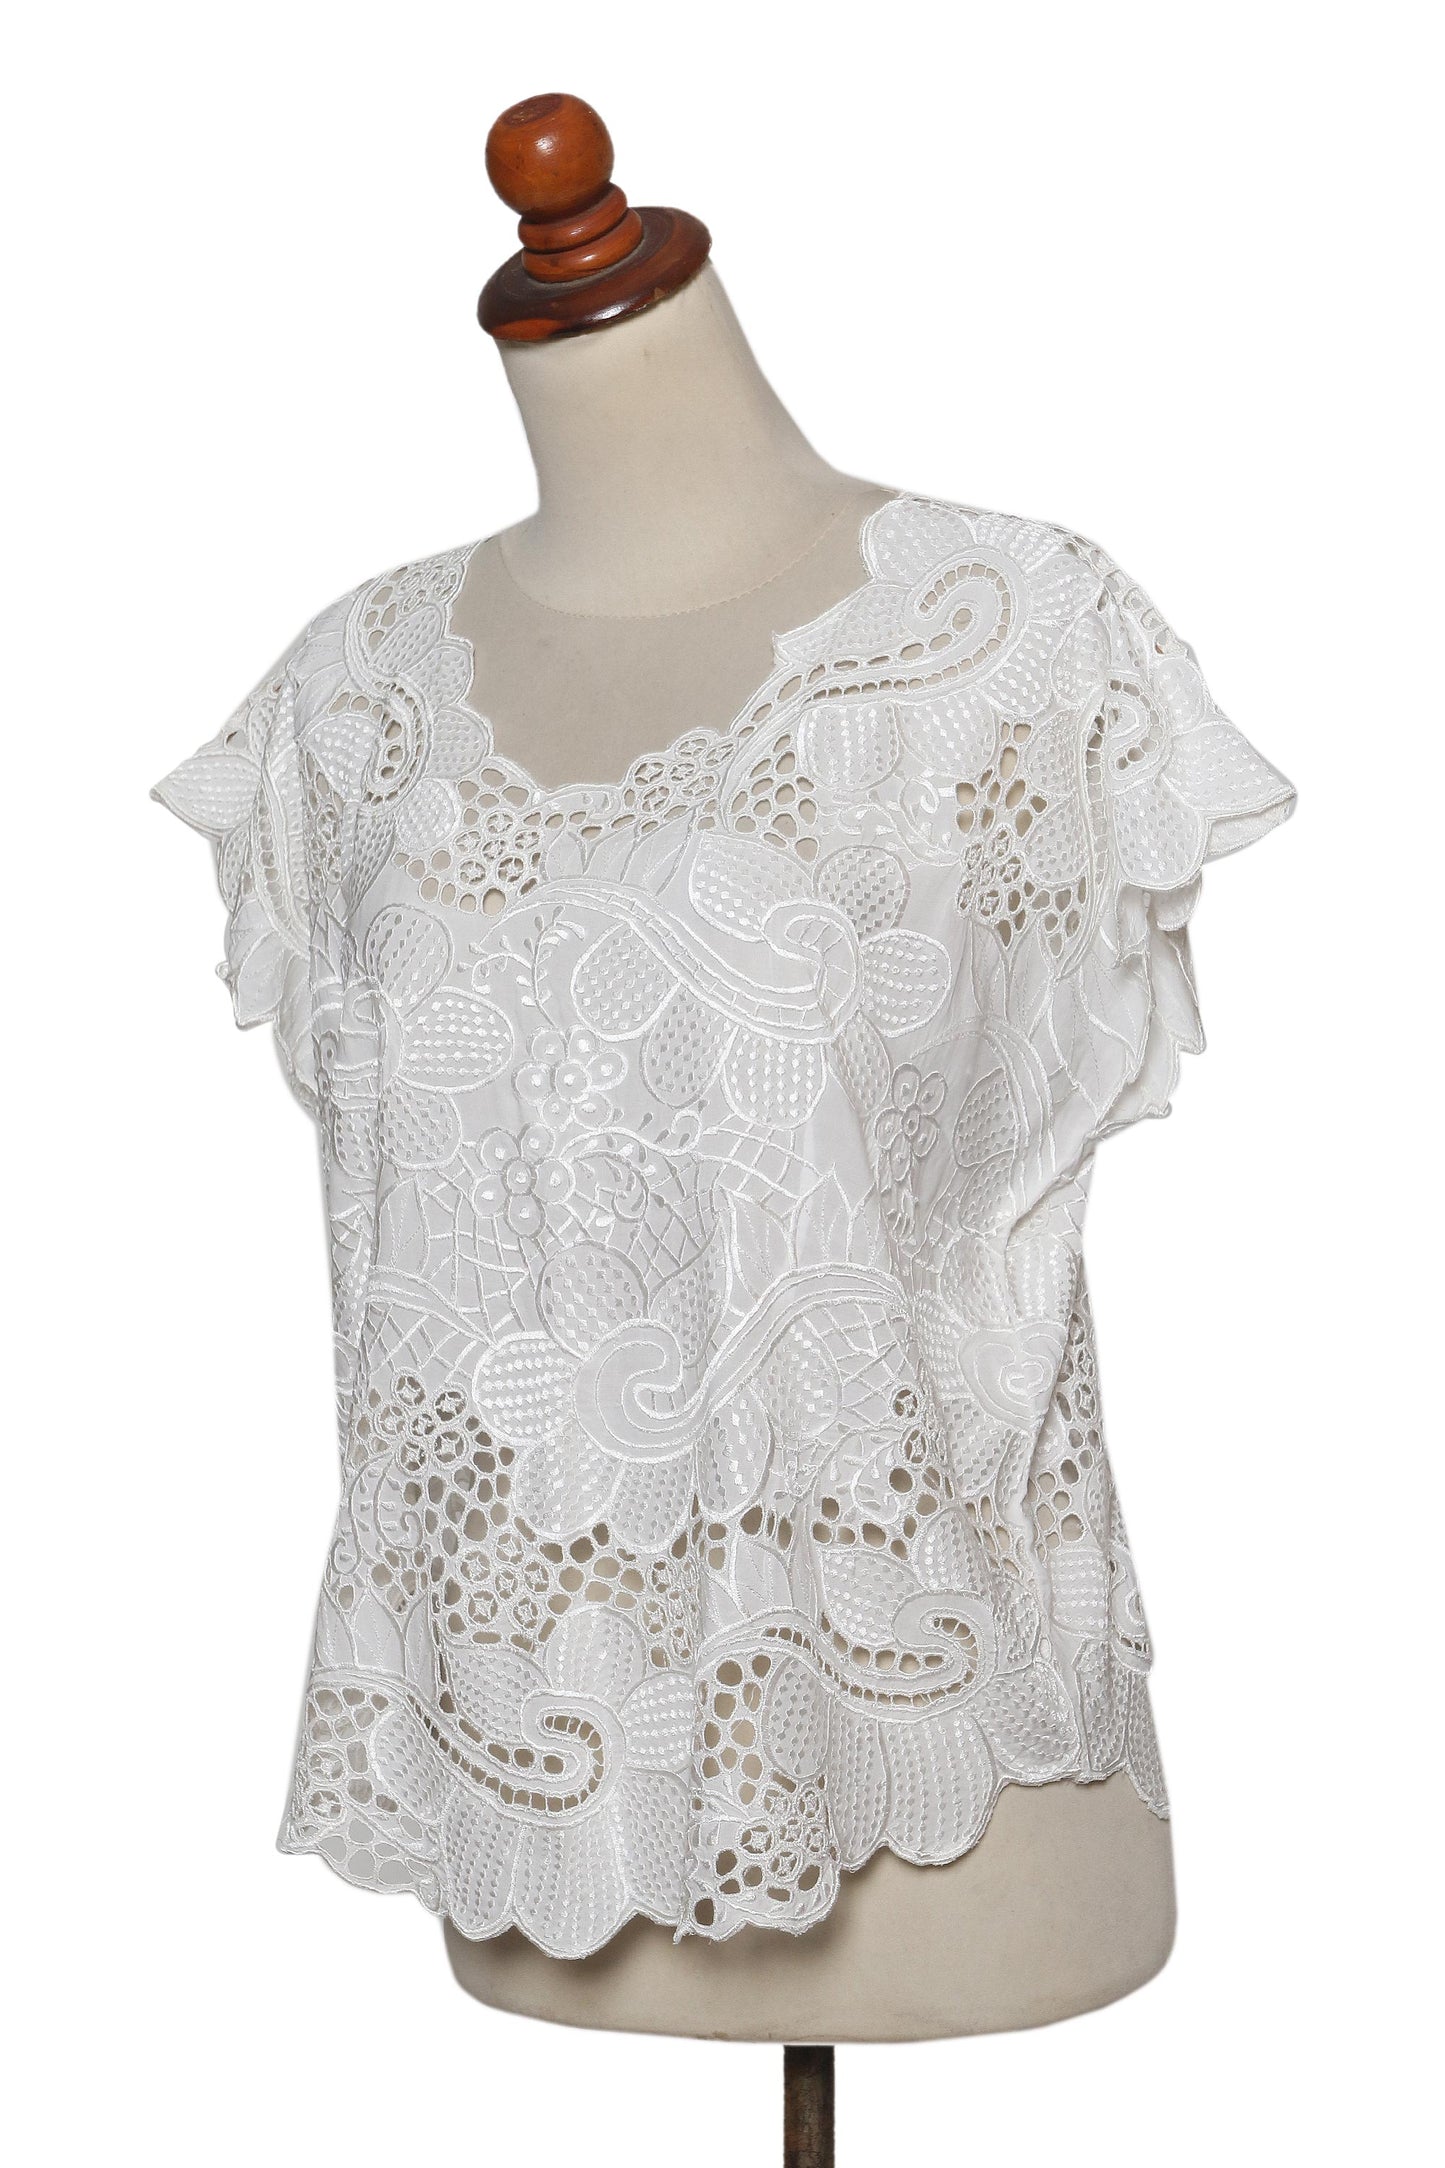 Rose Mallow in White Floral White-On-White Openwork and Embroidered Rayon Top